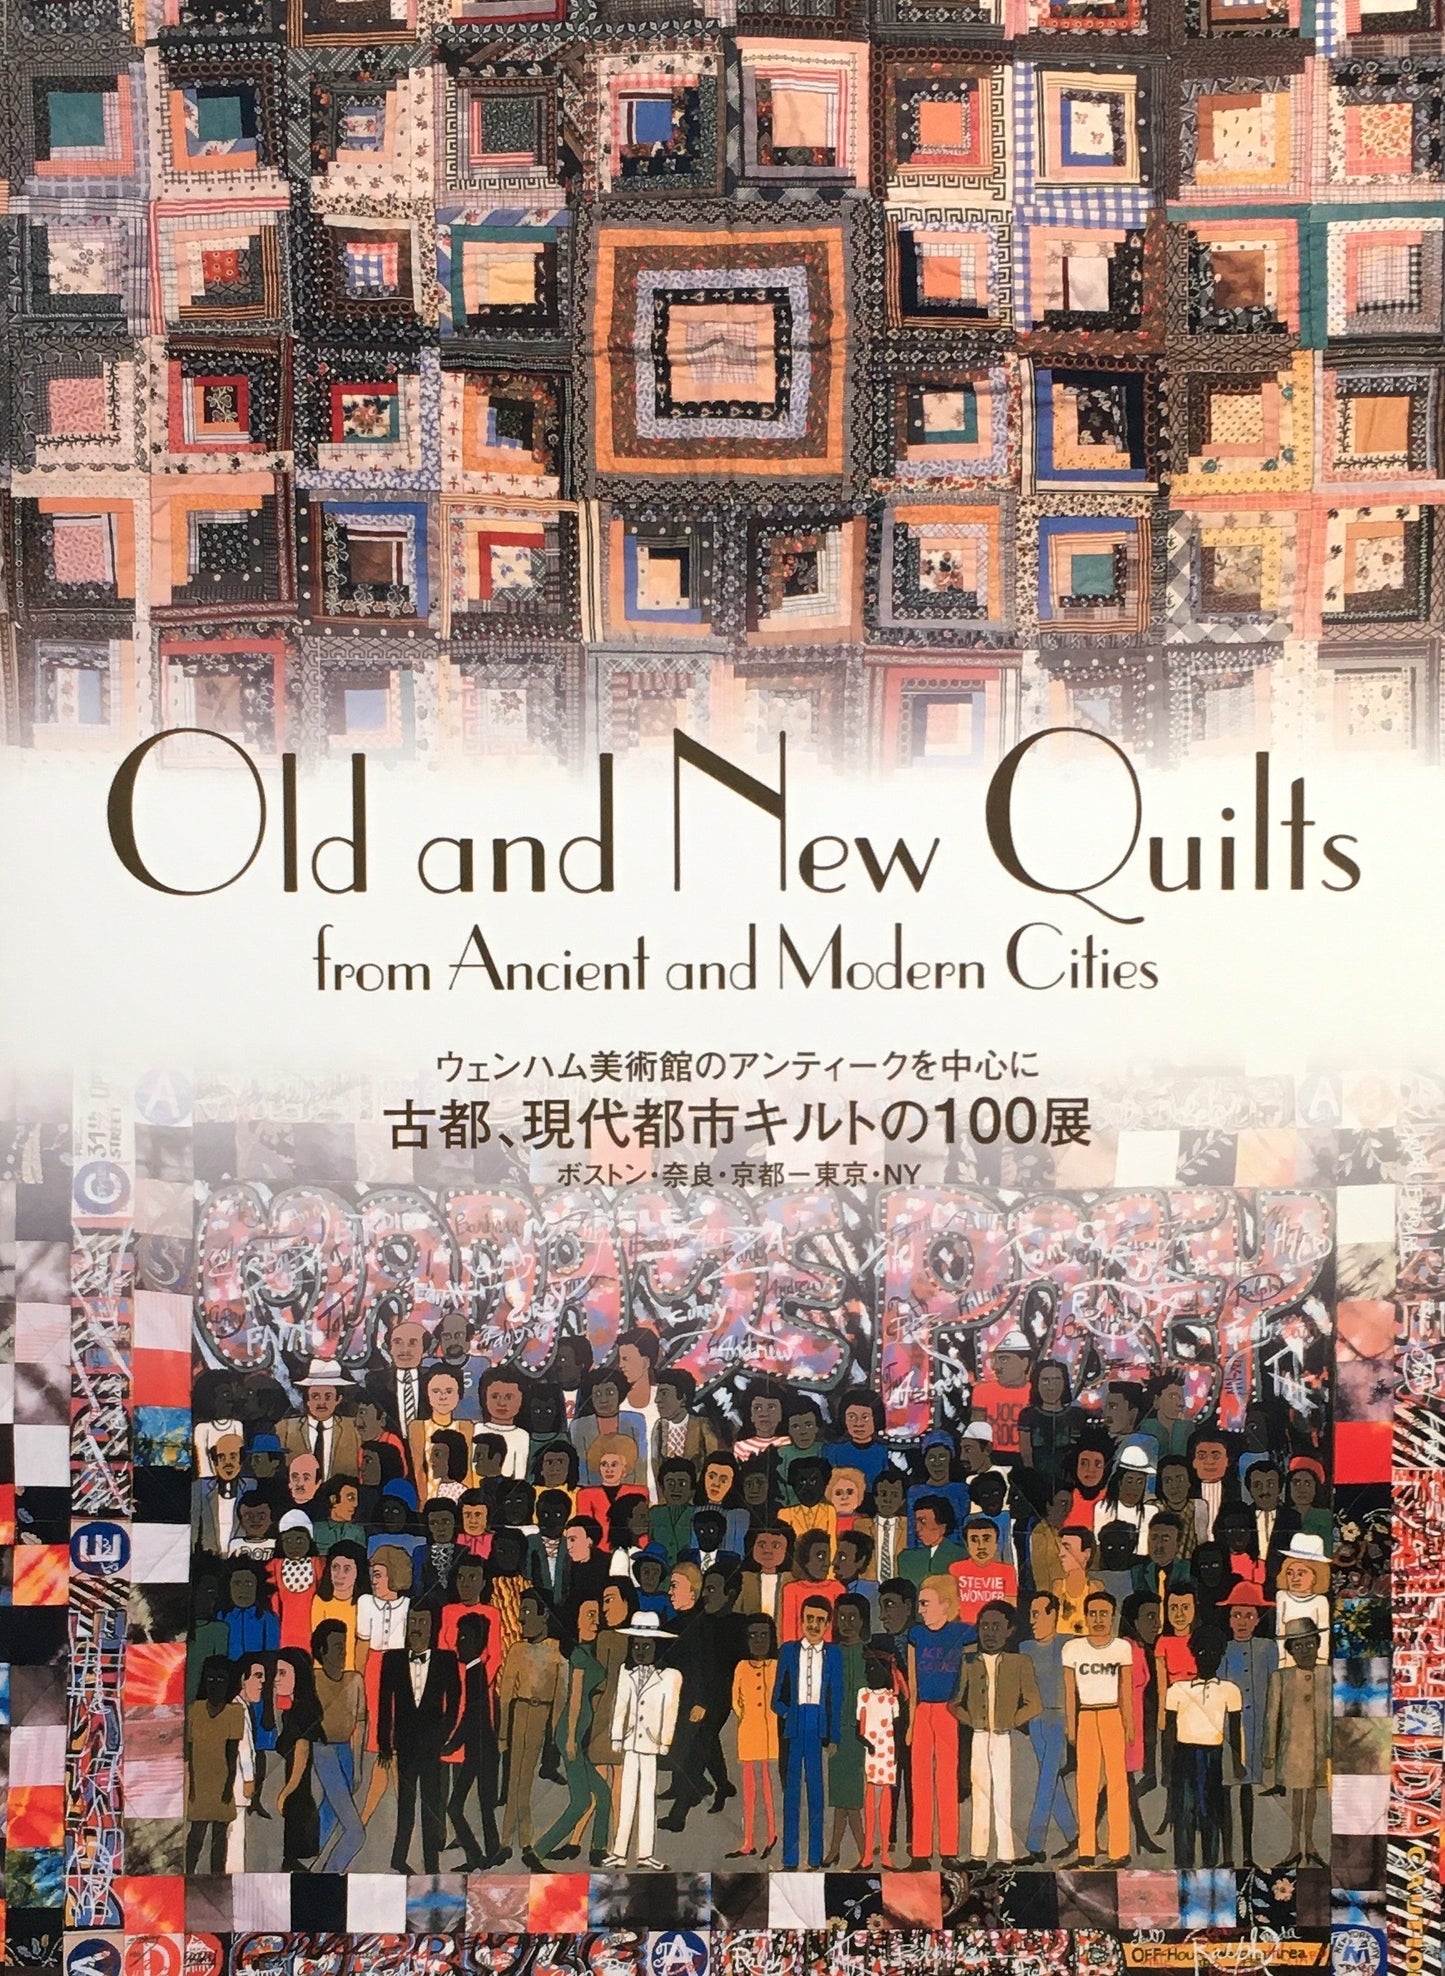 Old and New Quilts from Ancient and Modern Cities　ウェンハム美術館のアンティークを中心に　古都、現代都市キルトの100展